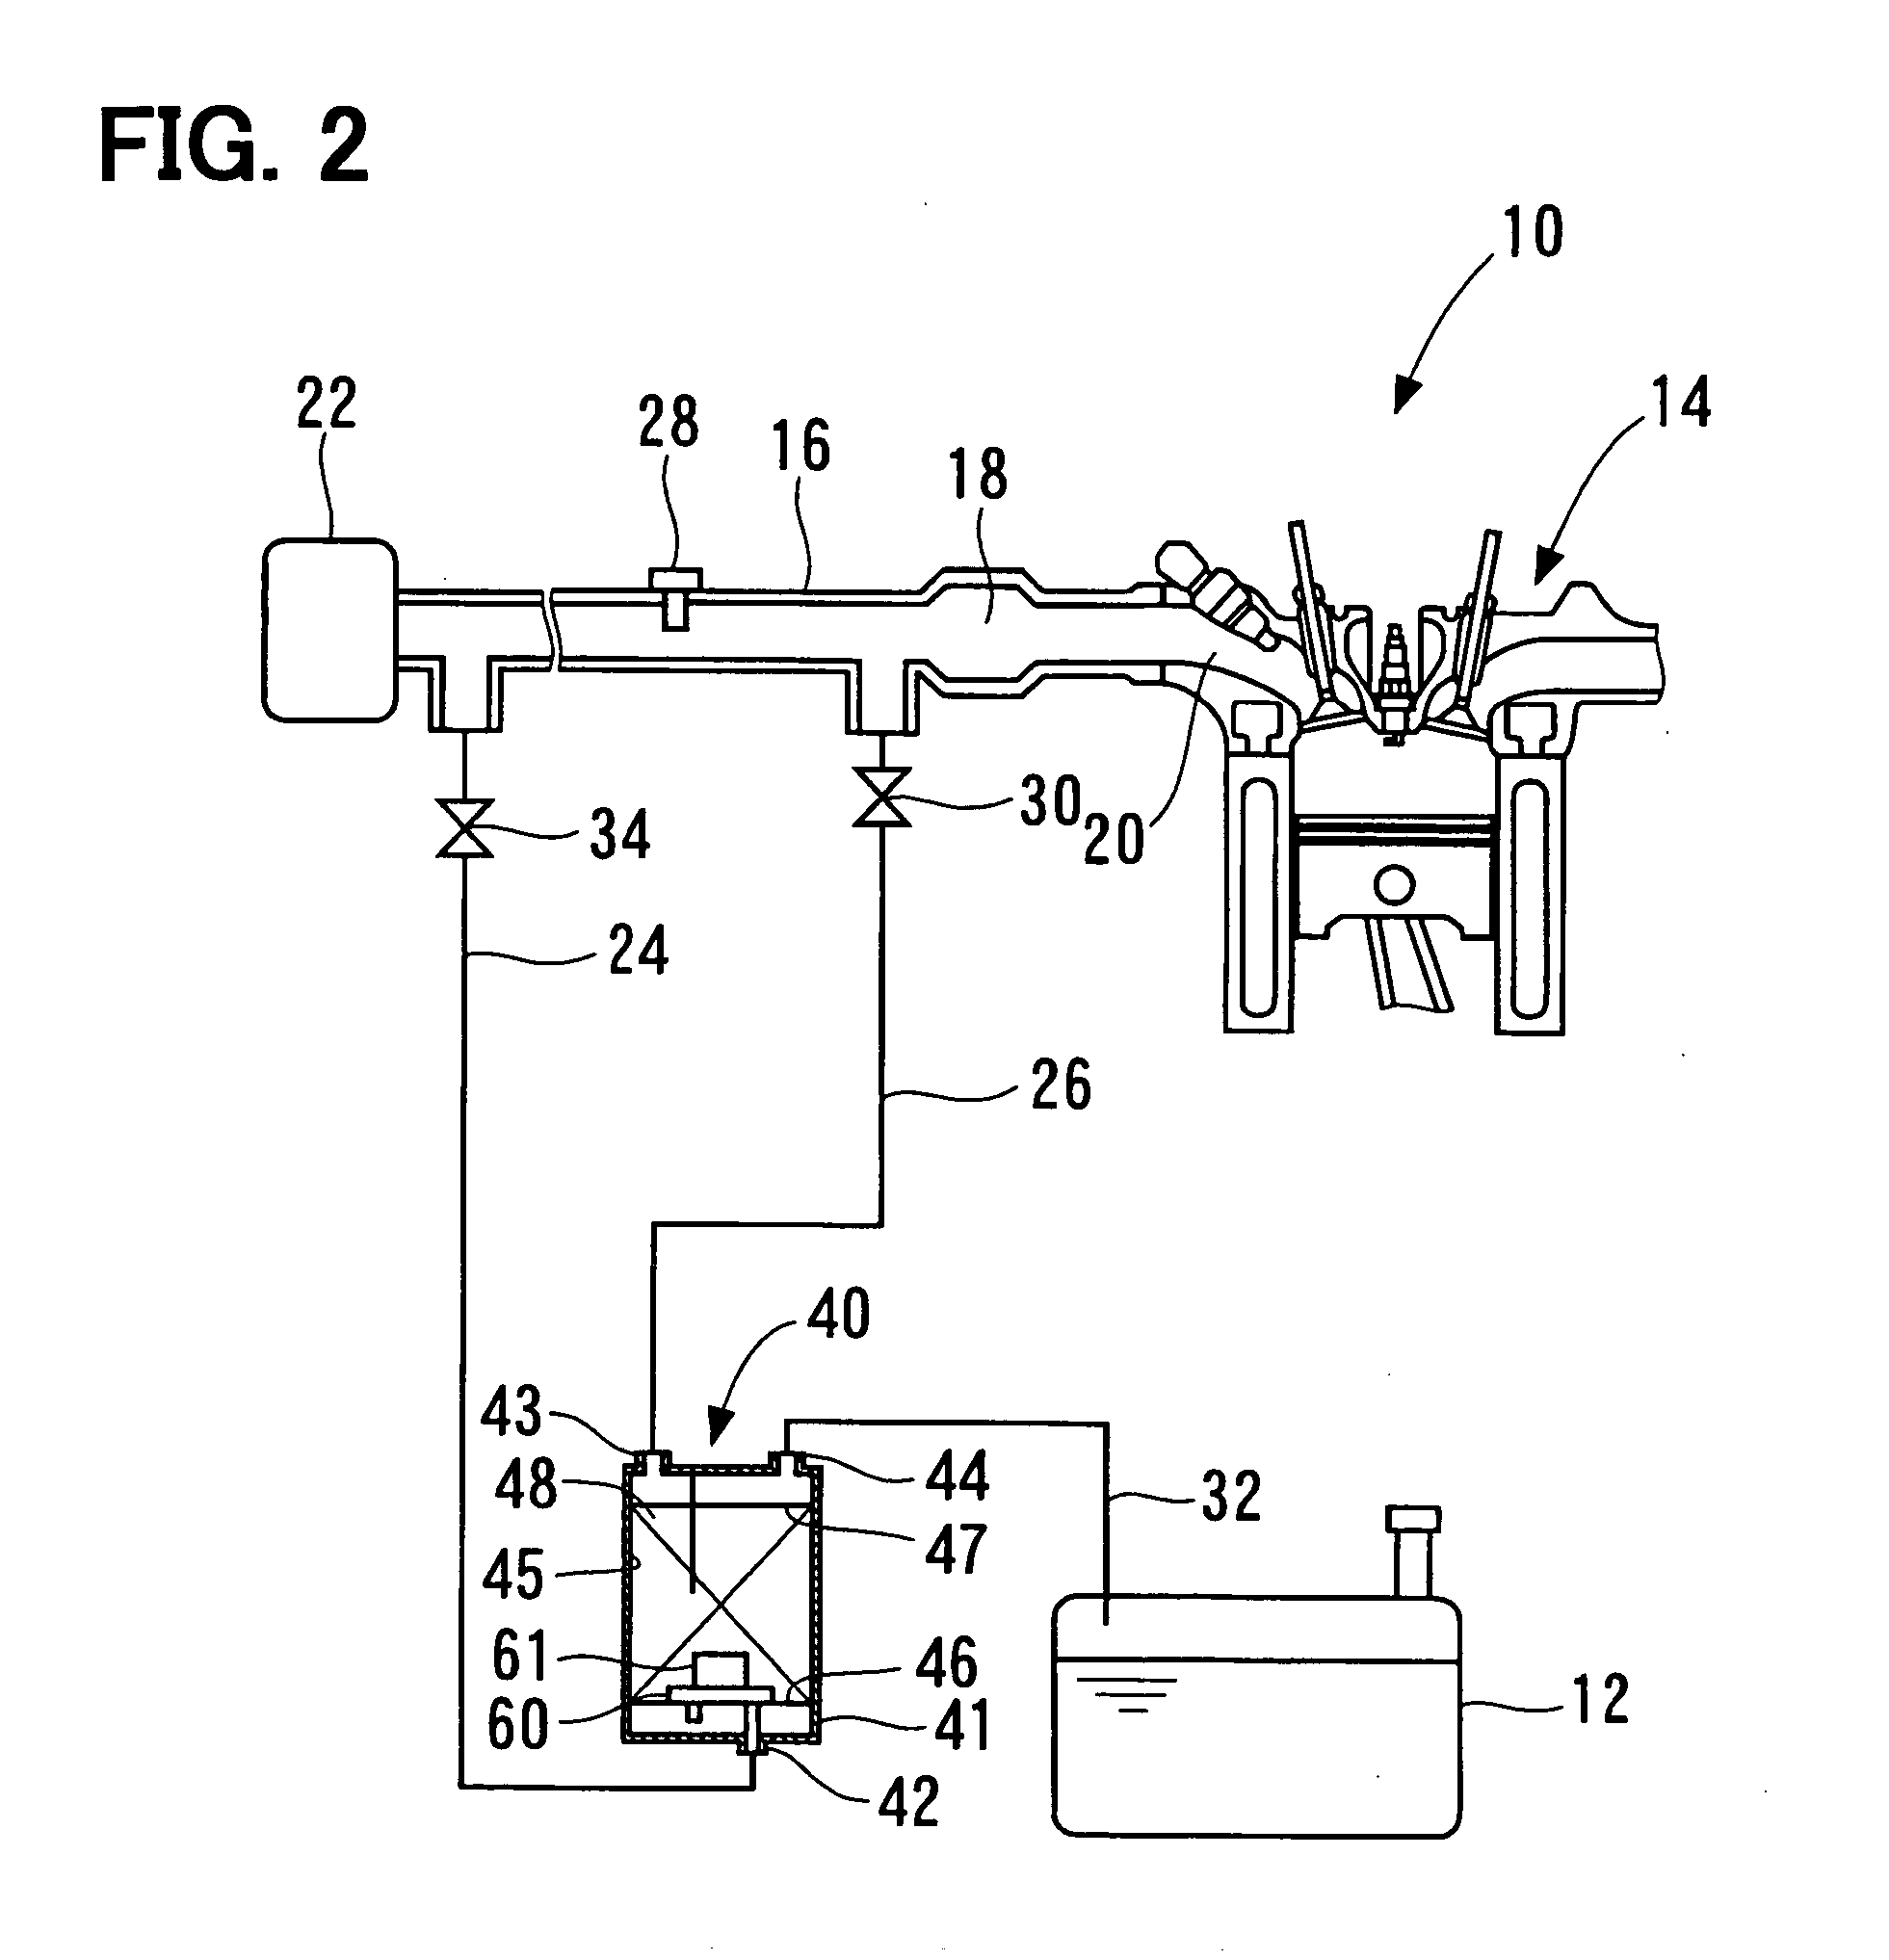 Canister having absorbent and fuel vapor treatment apparatus